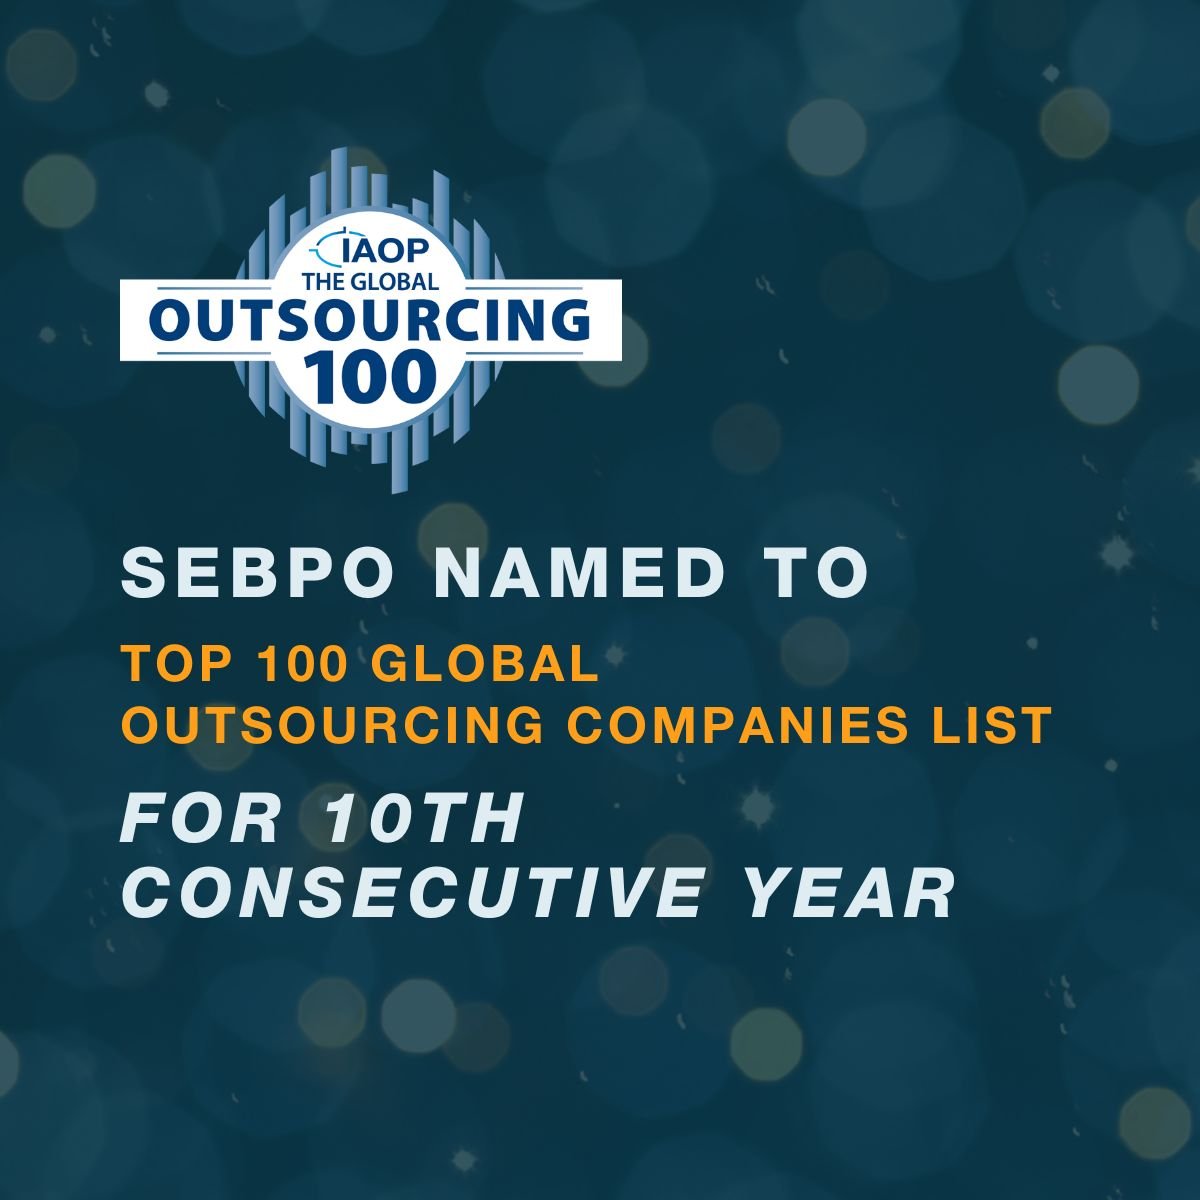 SEBPO Ranked Among Top 100 Global Outsourcing Companies for Tenth Consecutive Year